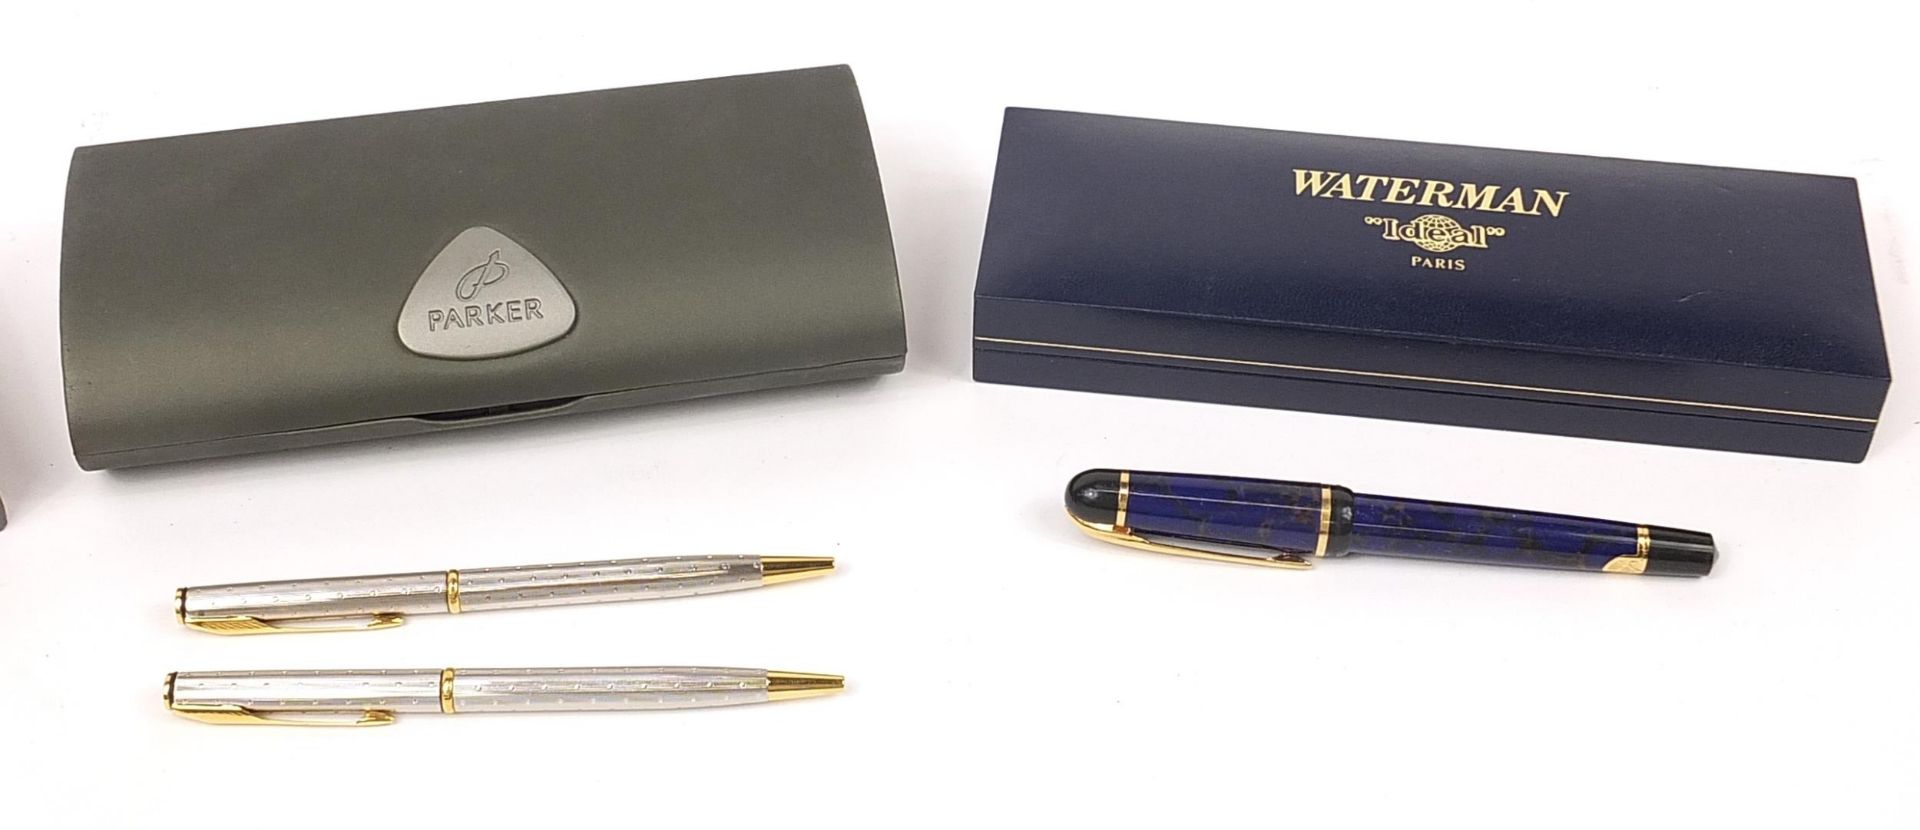 Fountain pens including Watermans Ideal, Parker Insignia and rolled gold Parker 51 fountain pen - Image 3 of 3